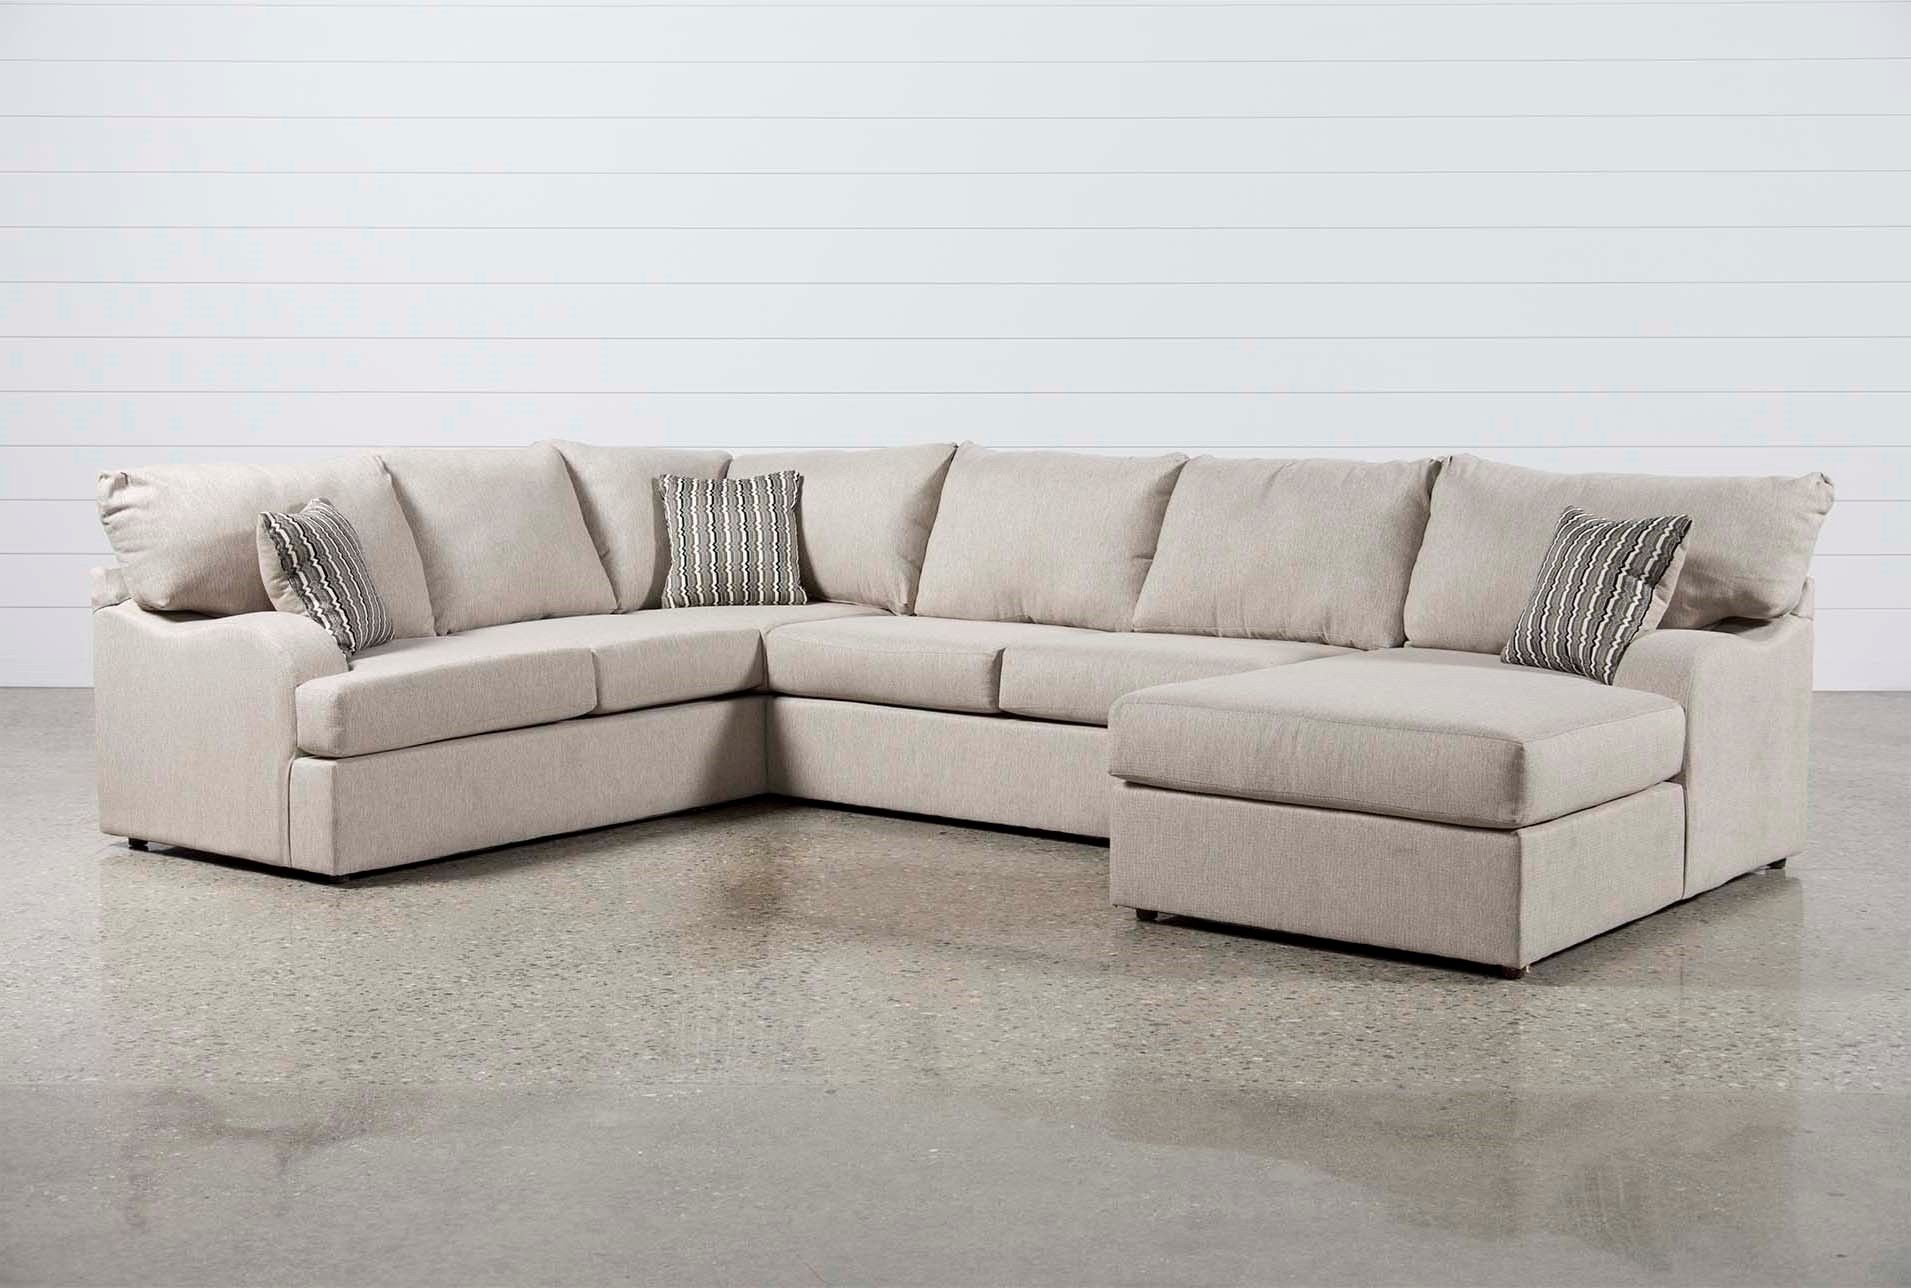 Raf Sectional Turdur 3 Piece W Loveseat Living Spaces 223462 0 Jpg Pertaining To Turdur 2 Piece Sectionals With Raf Loveseat (View 7 of 30)